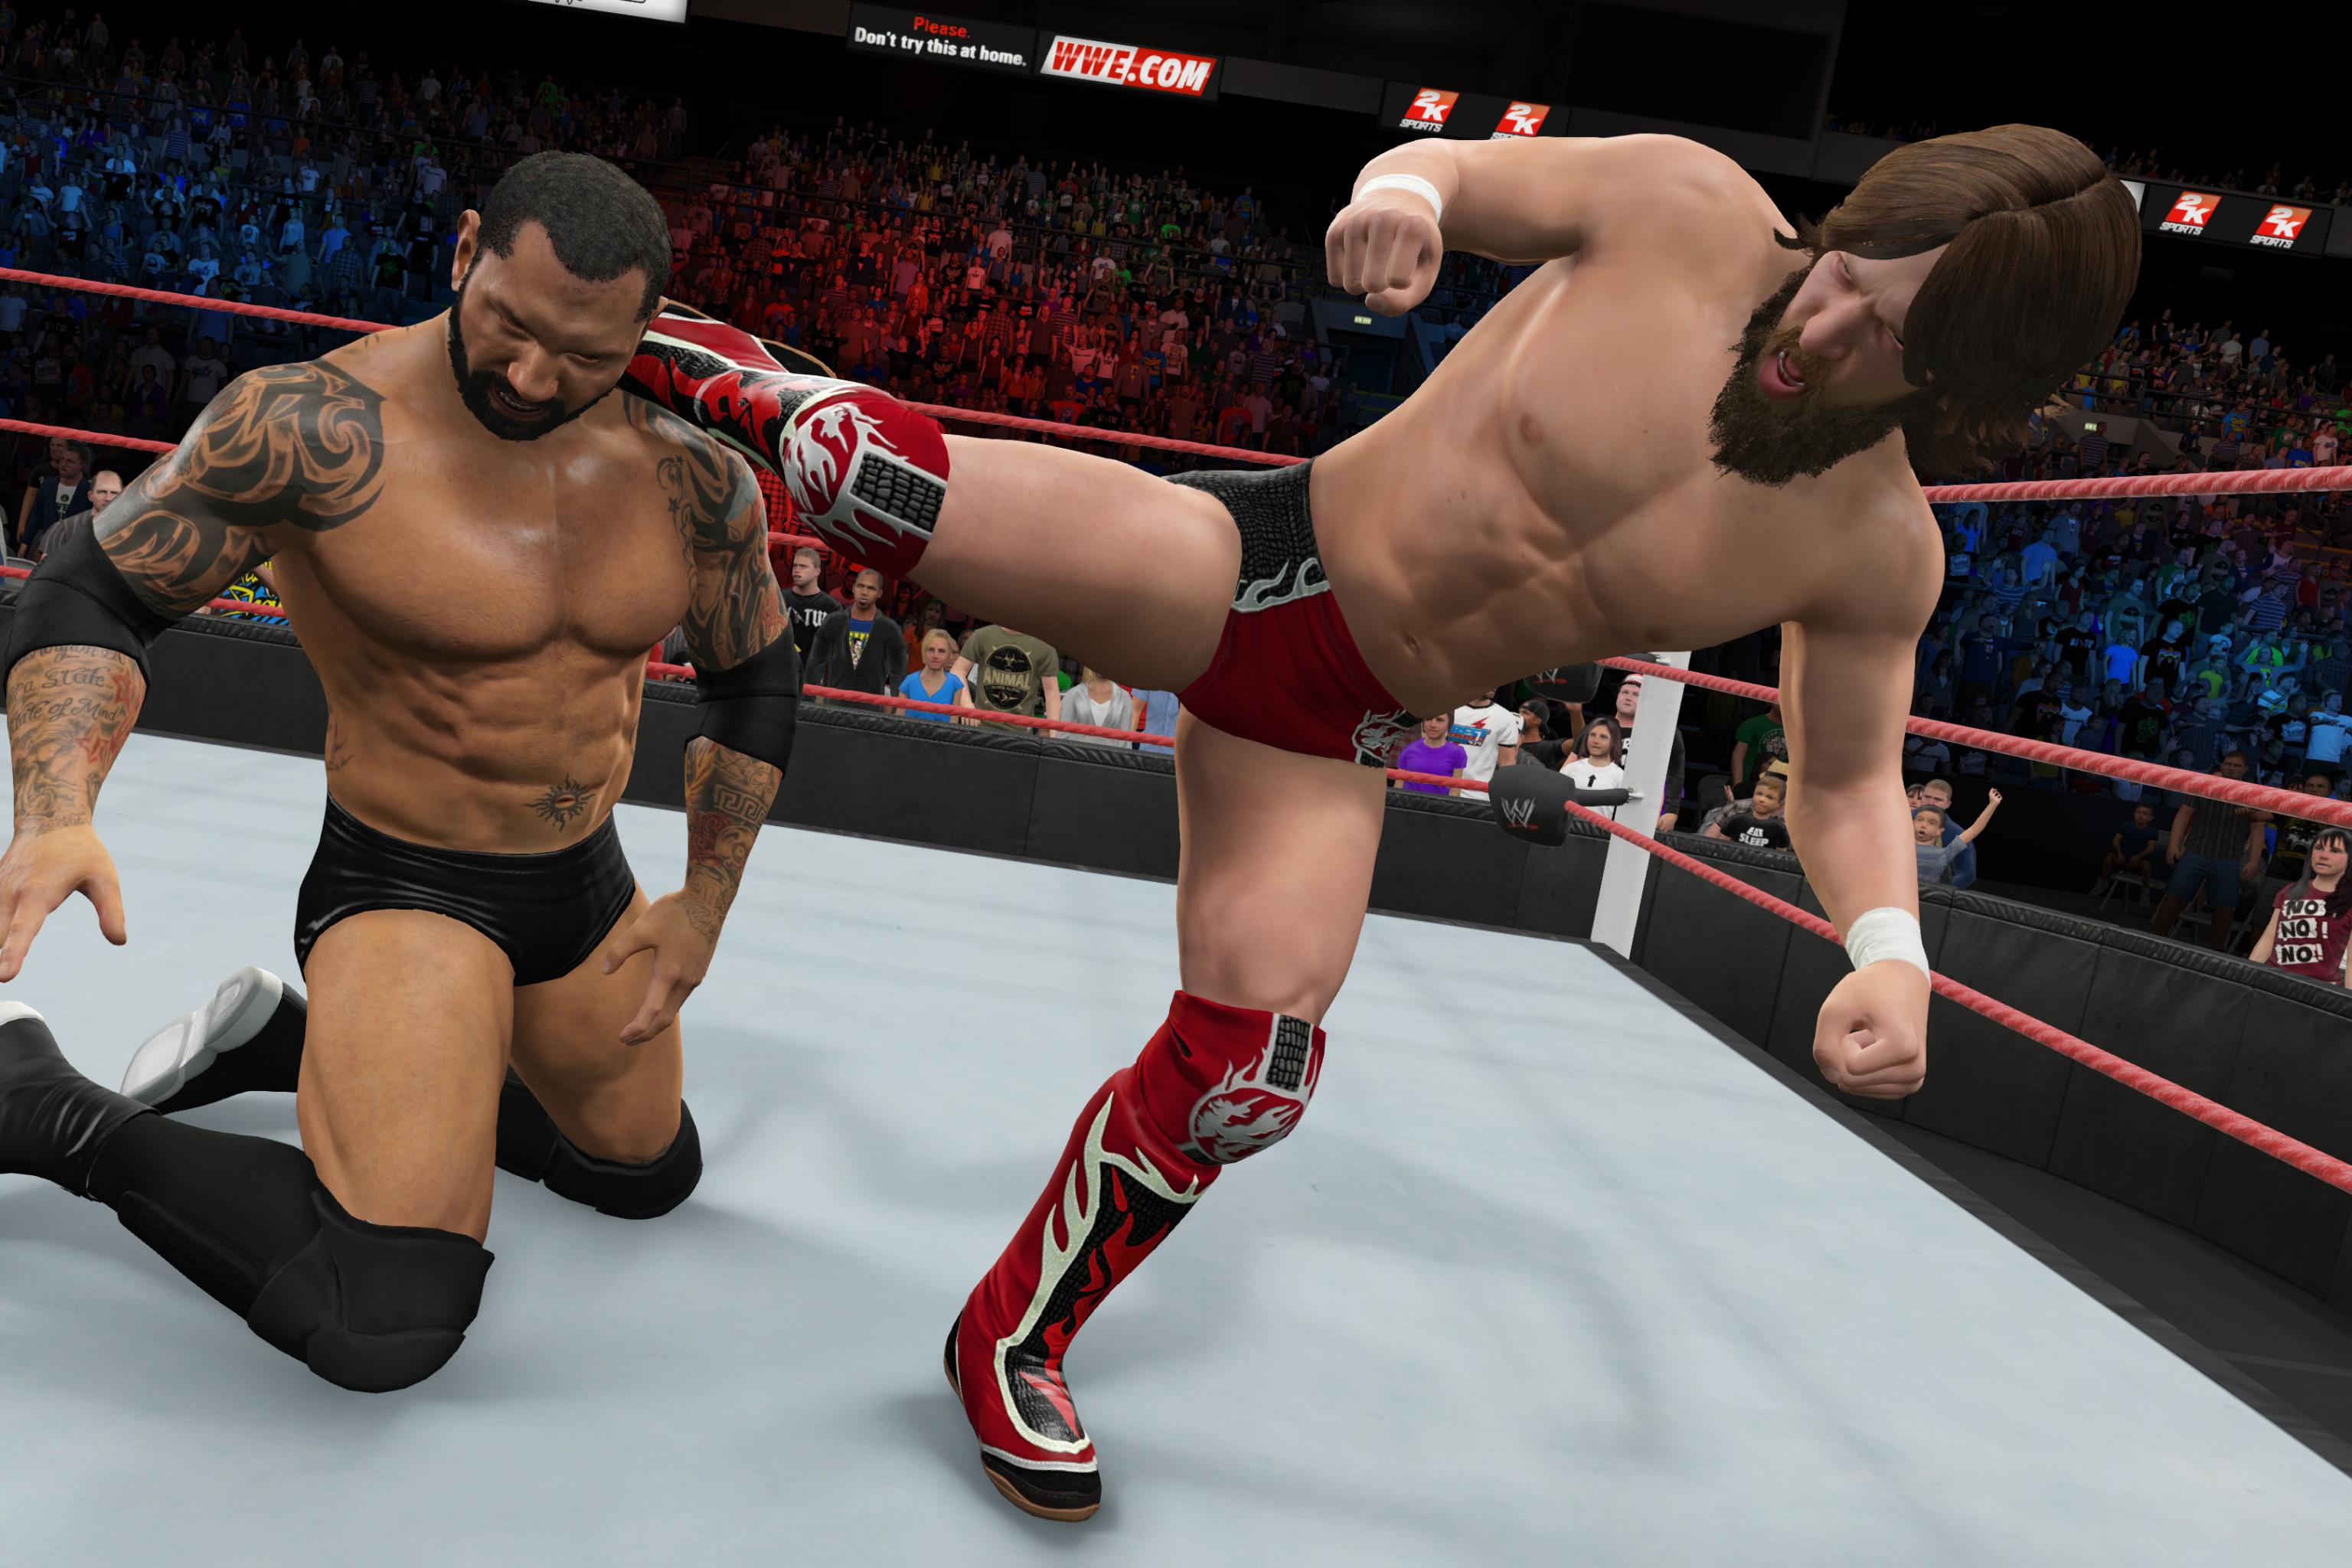 Wwe 2k15 pc download highly compressed